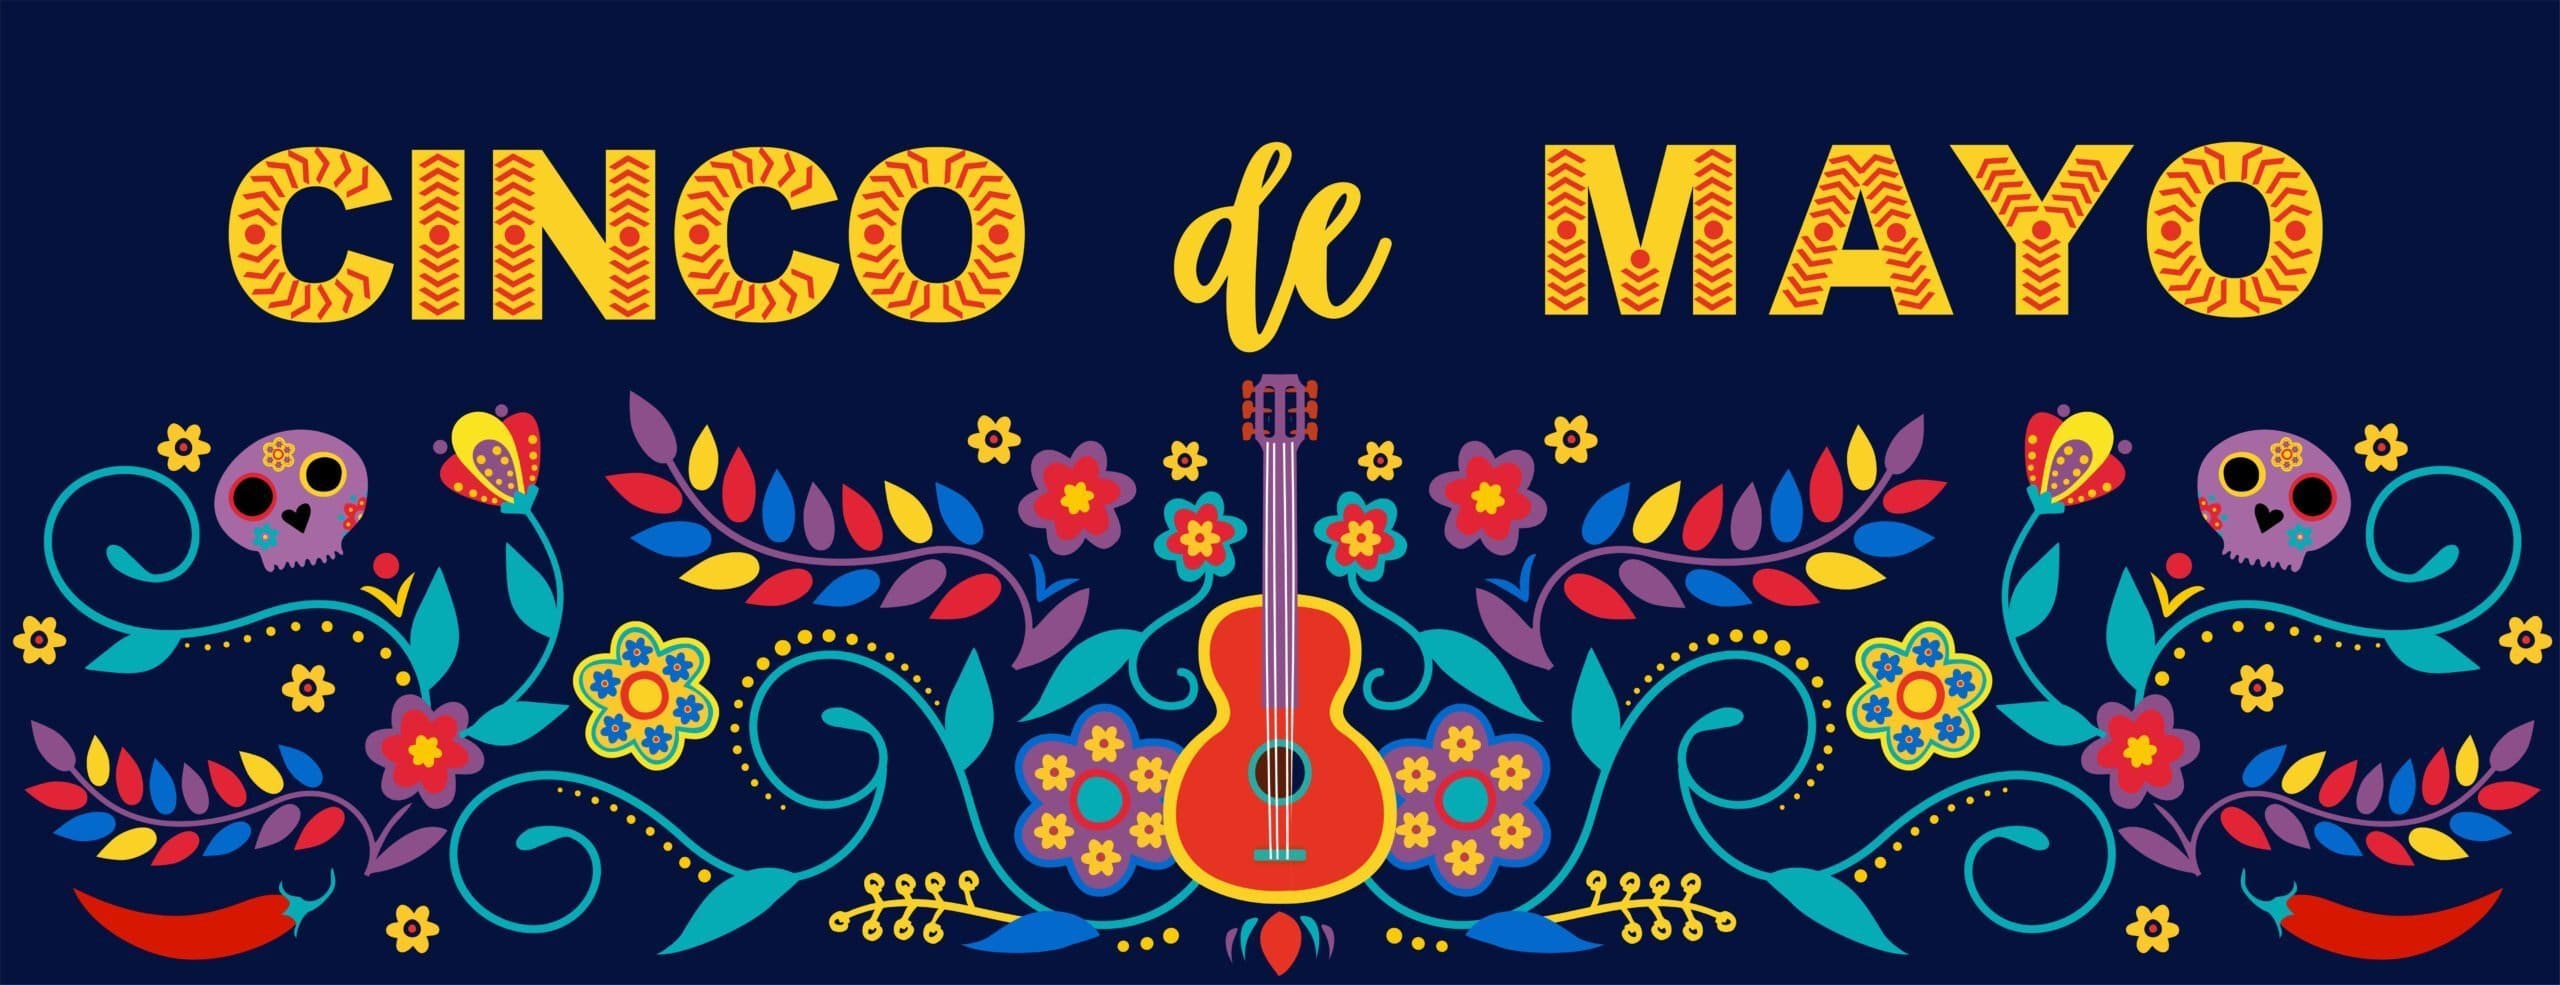 Cinco de Mayo Mexican banner with guitar and flowers